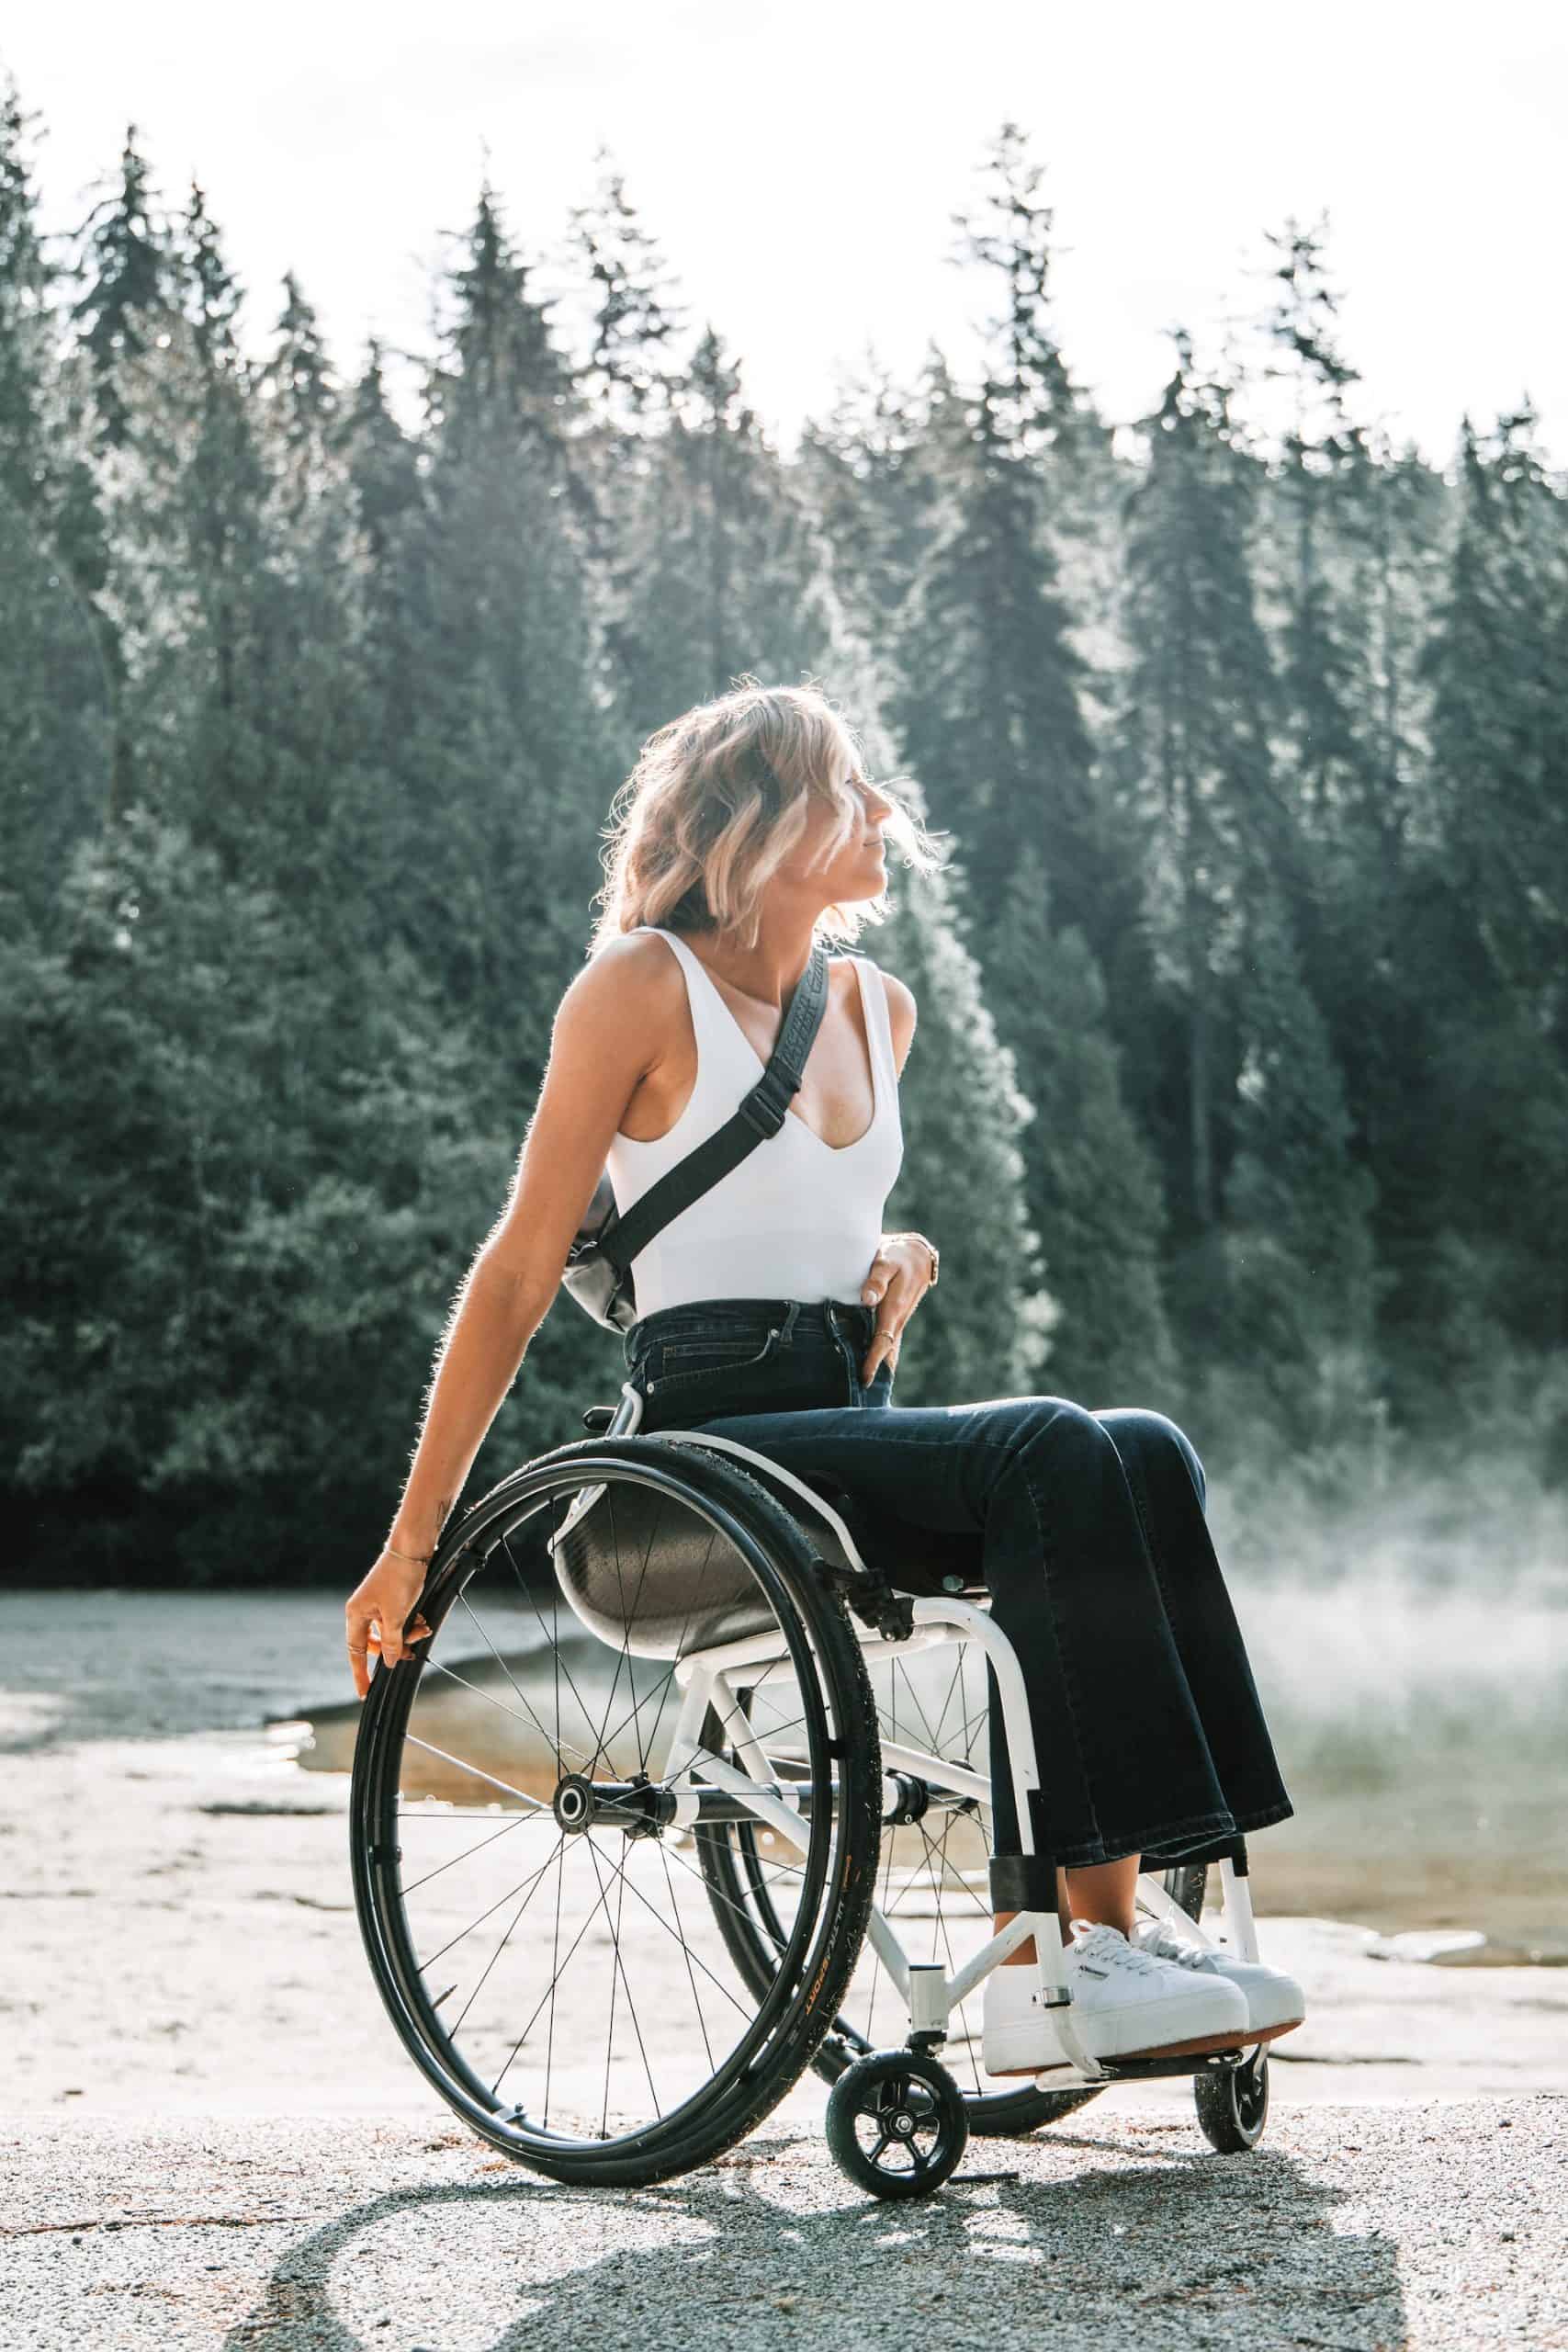 The Most Comfortable Adaptive Pants for Wheelchair Users